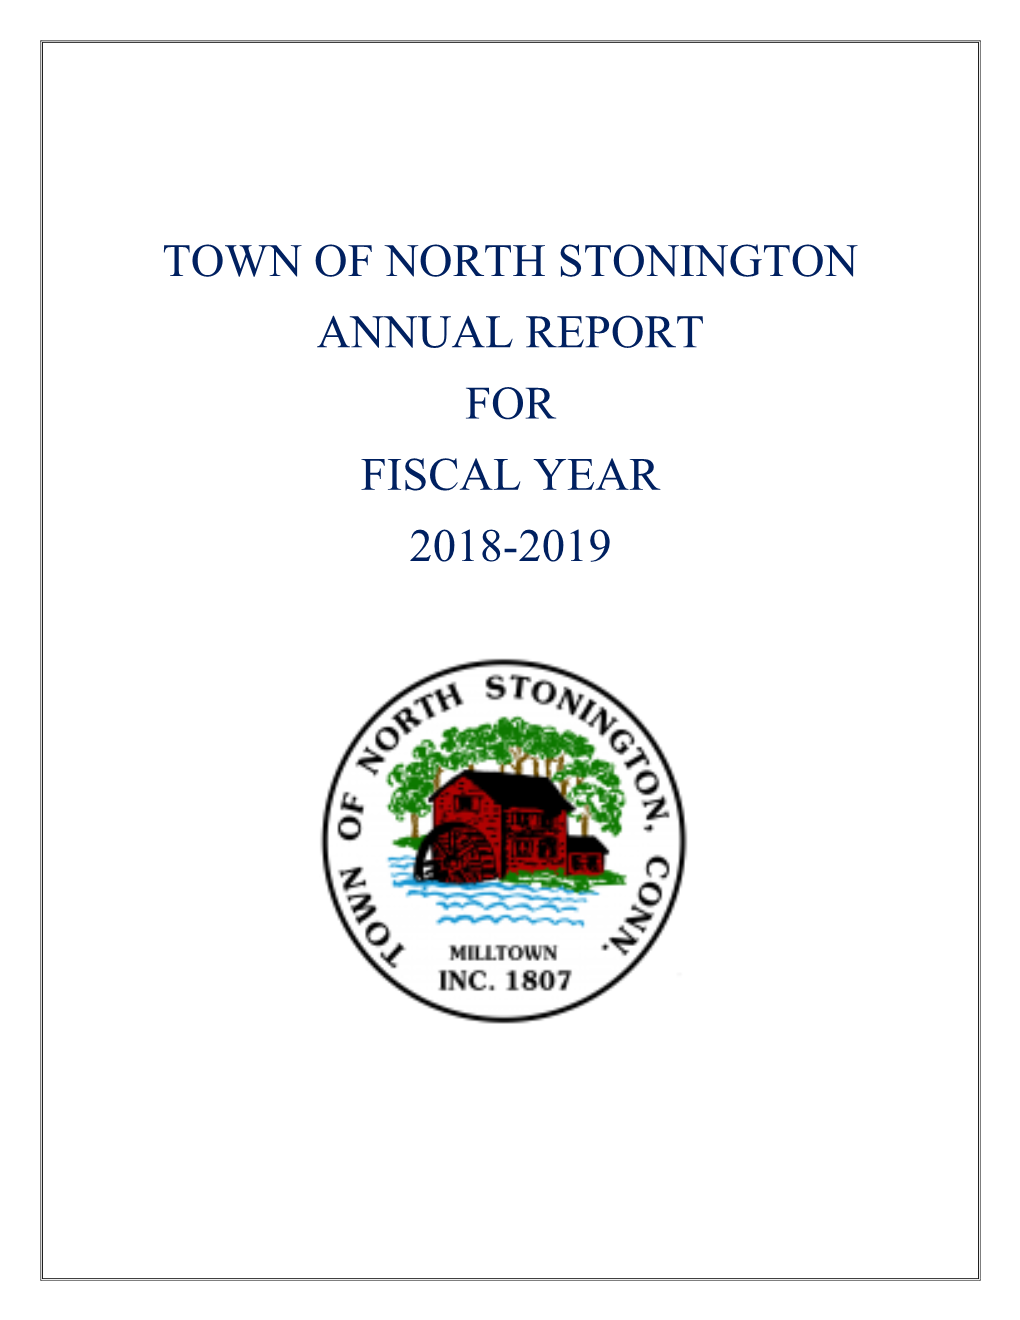 Town of North Stonington Annual Report Fiscal Year 2018-2019